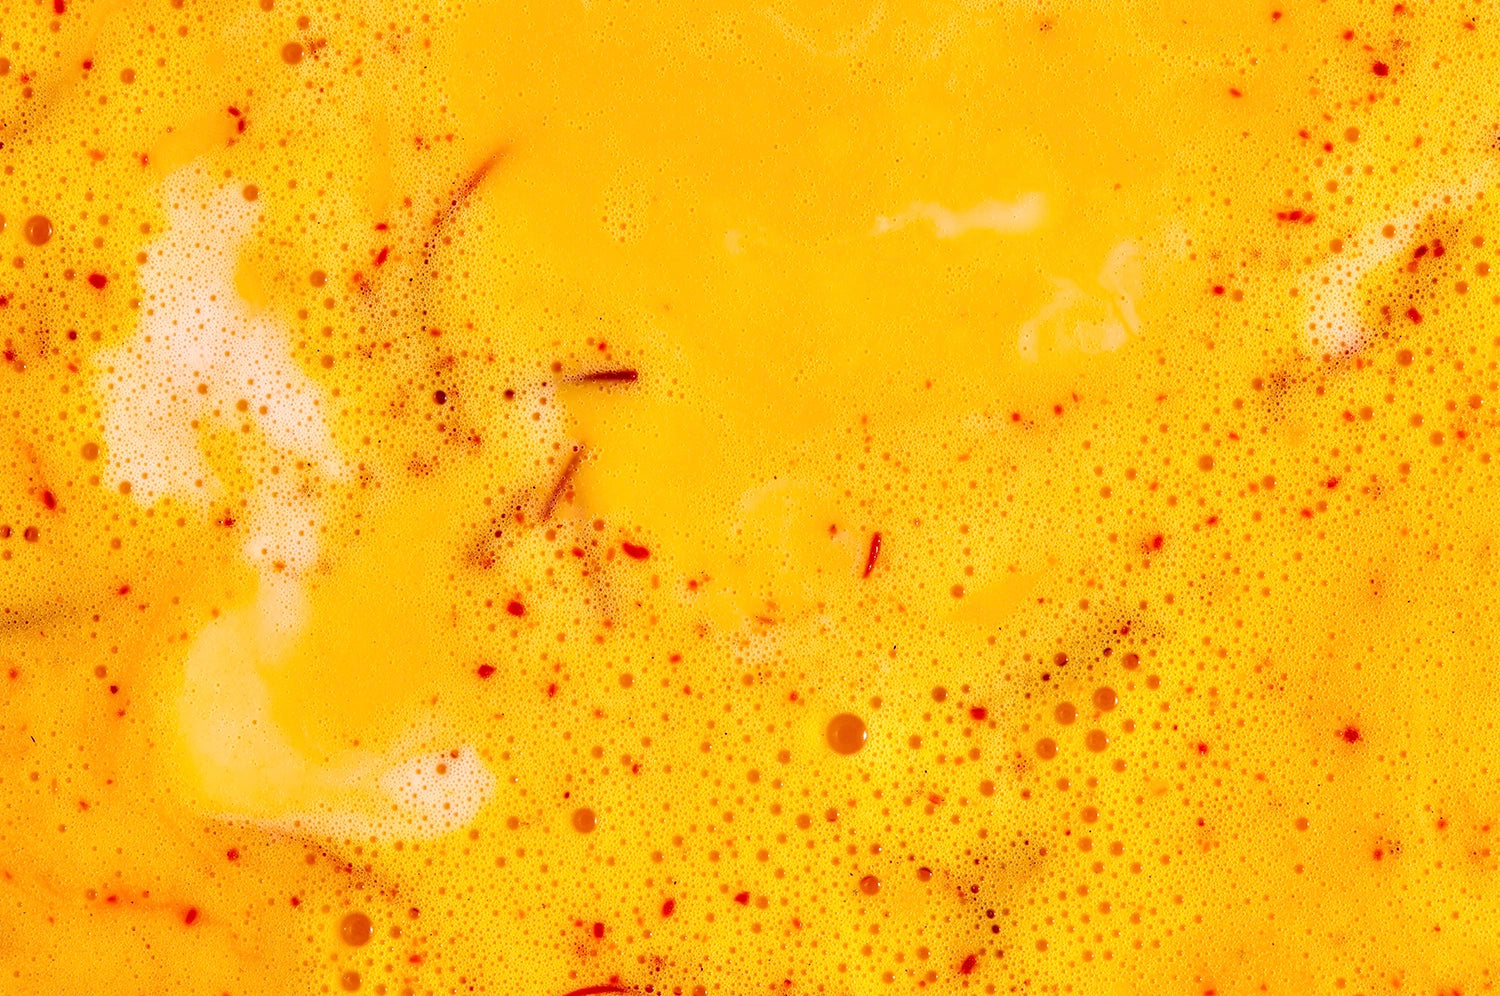 An up-close view of a saffron latte beverage from The Fullest.